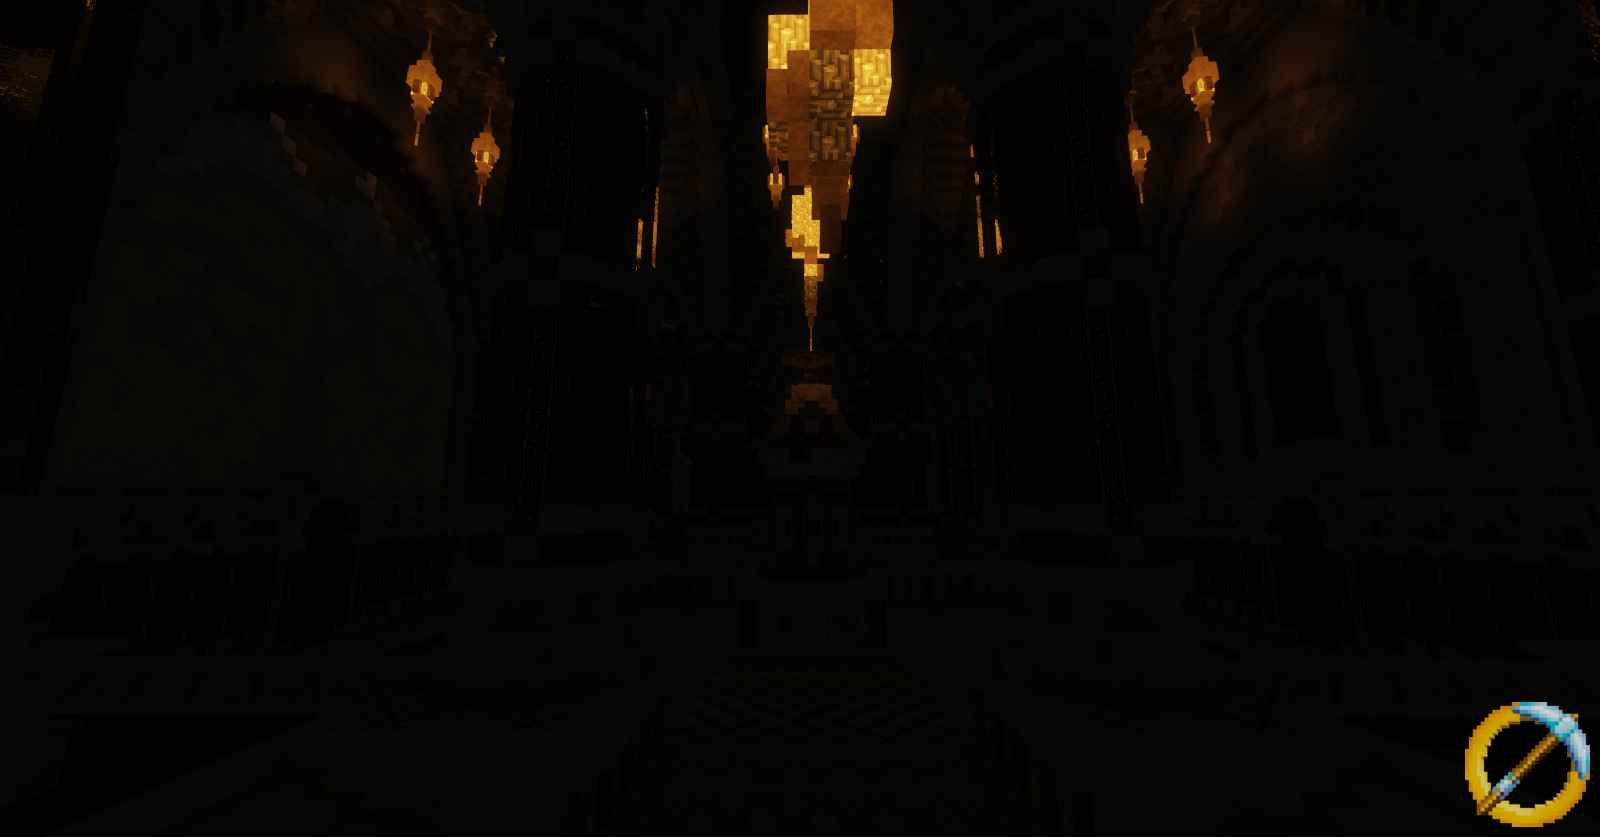 The Great Halls of Moria